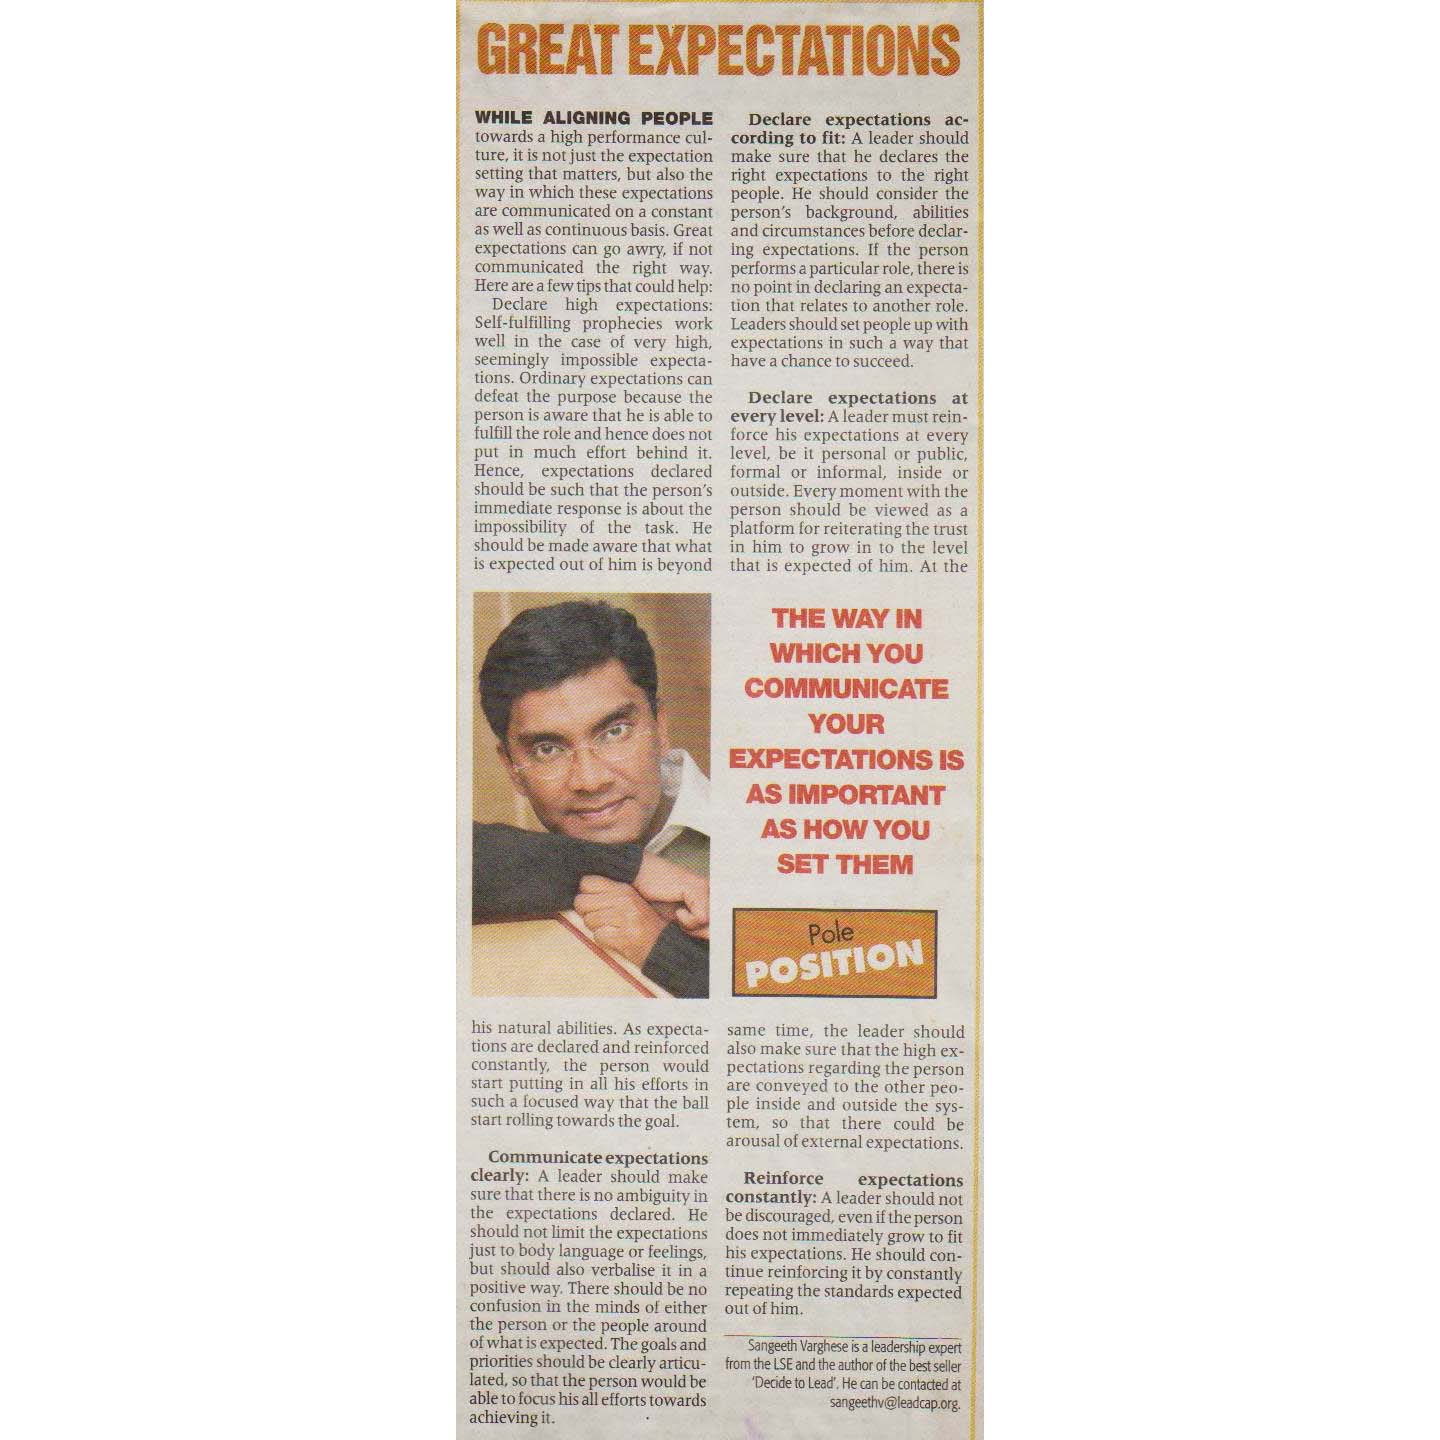 The Economic Times 17 October 2008